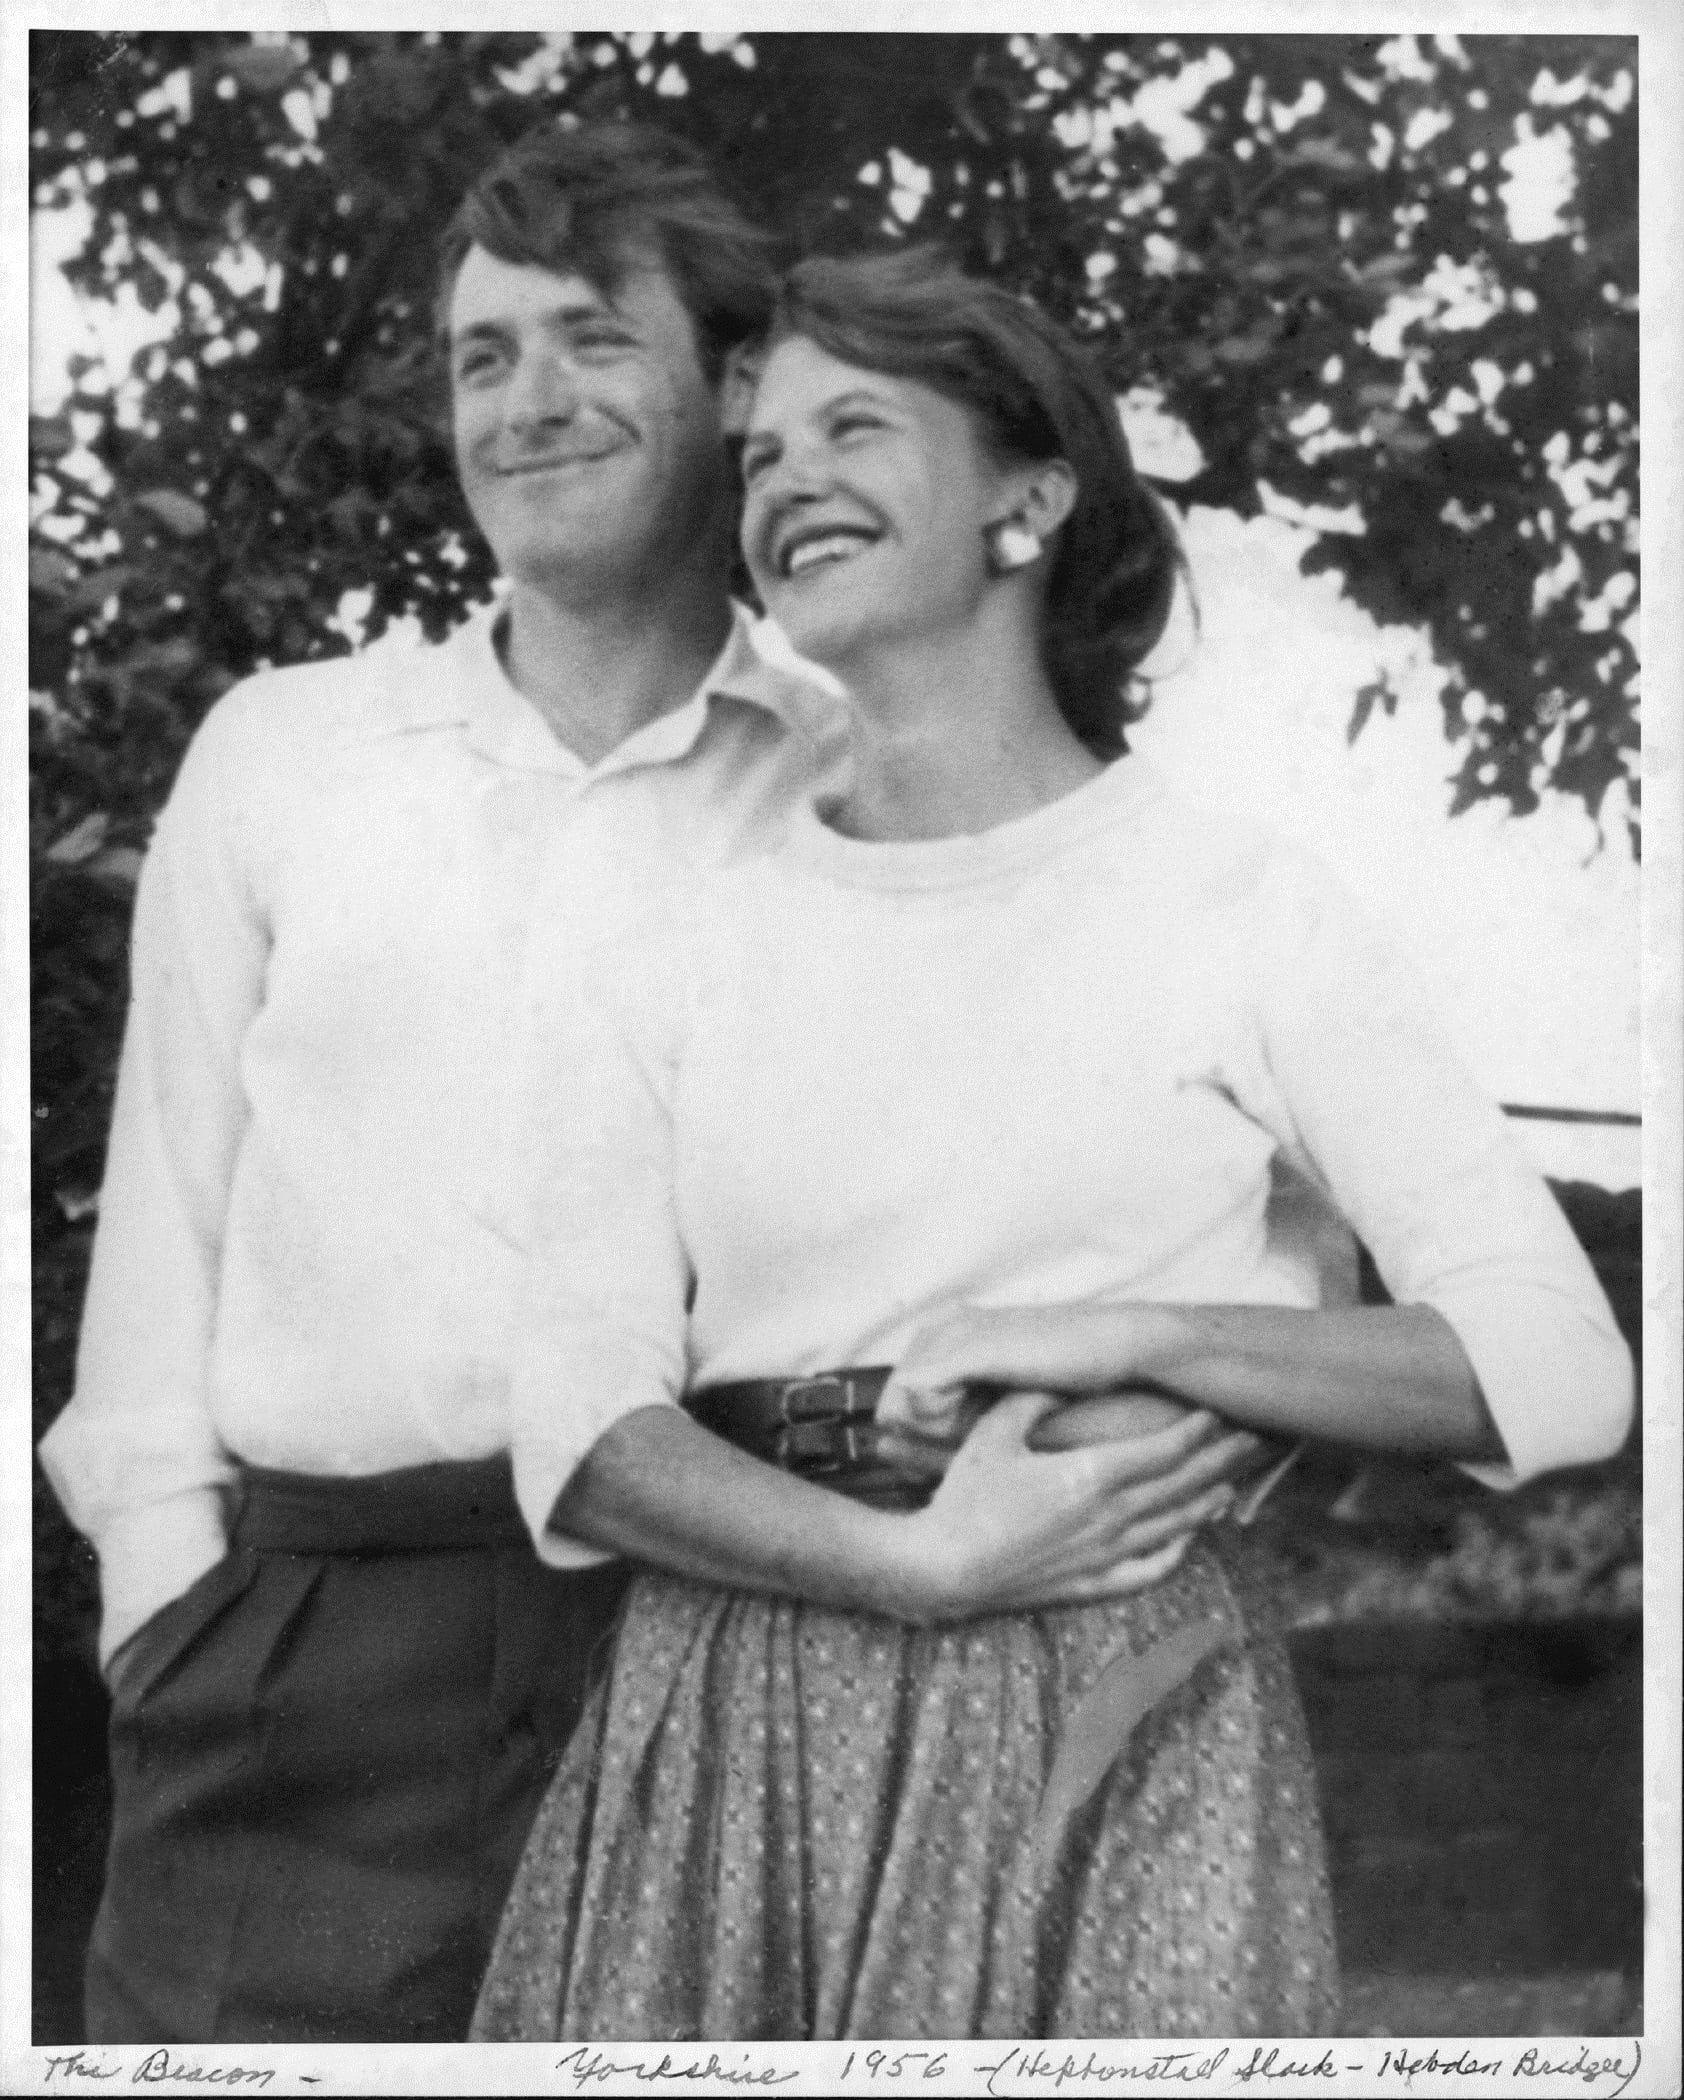 Ted Hughes and Sylvia Plath in Yorkshire, UK, 1956. Ph. Harry Ogden, Courtesy Mortimer Rare Book Collection, Smith College, Northampton, Massachusetts